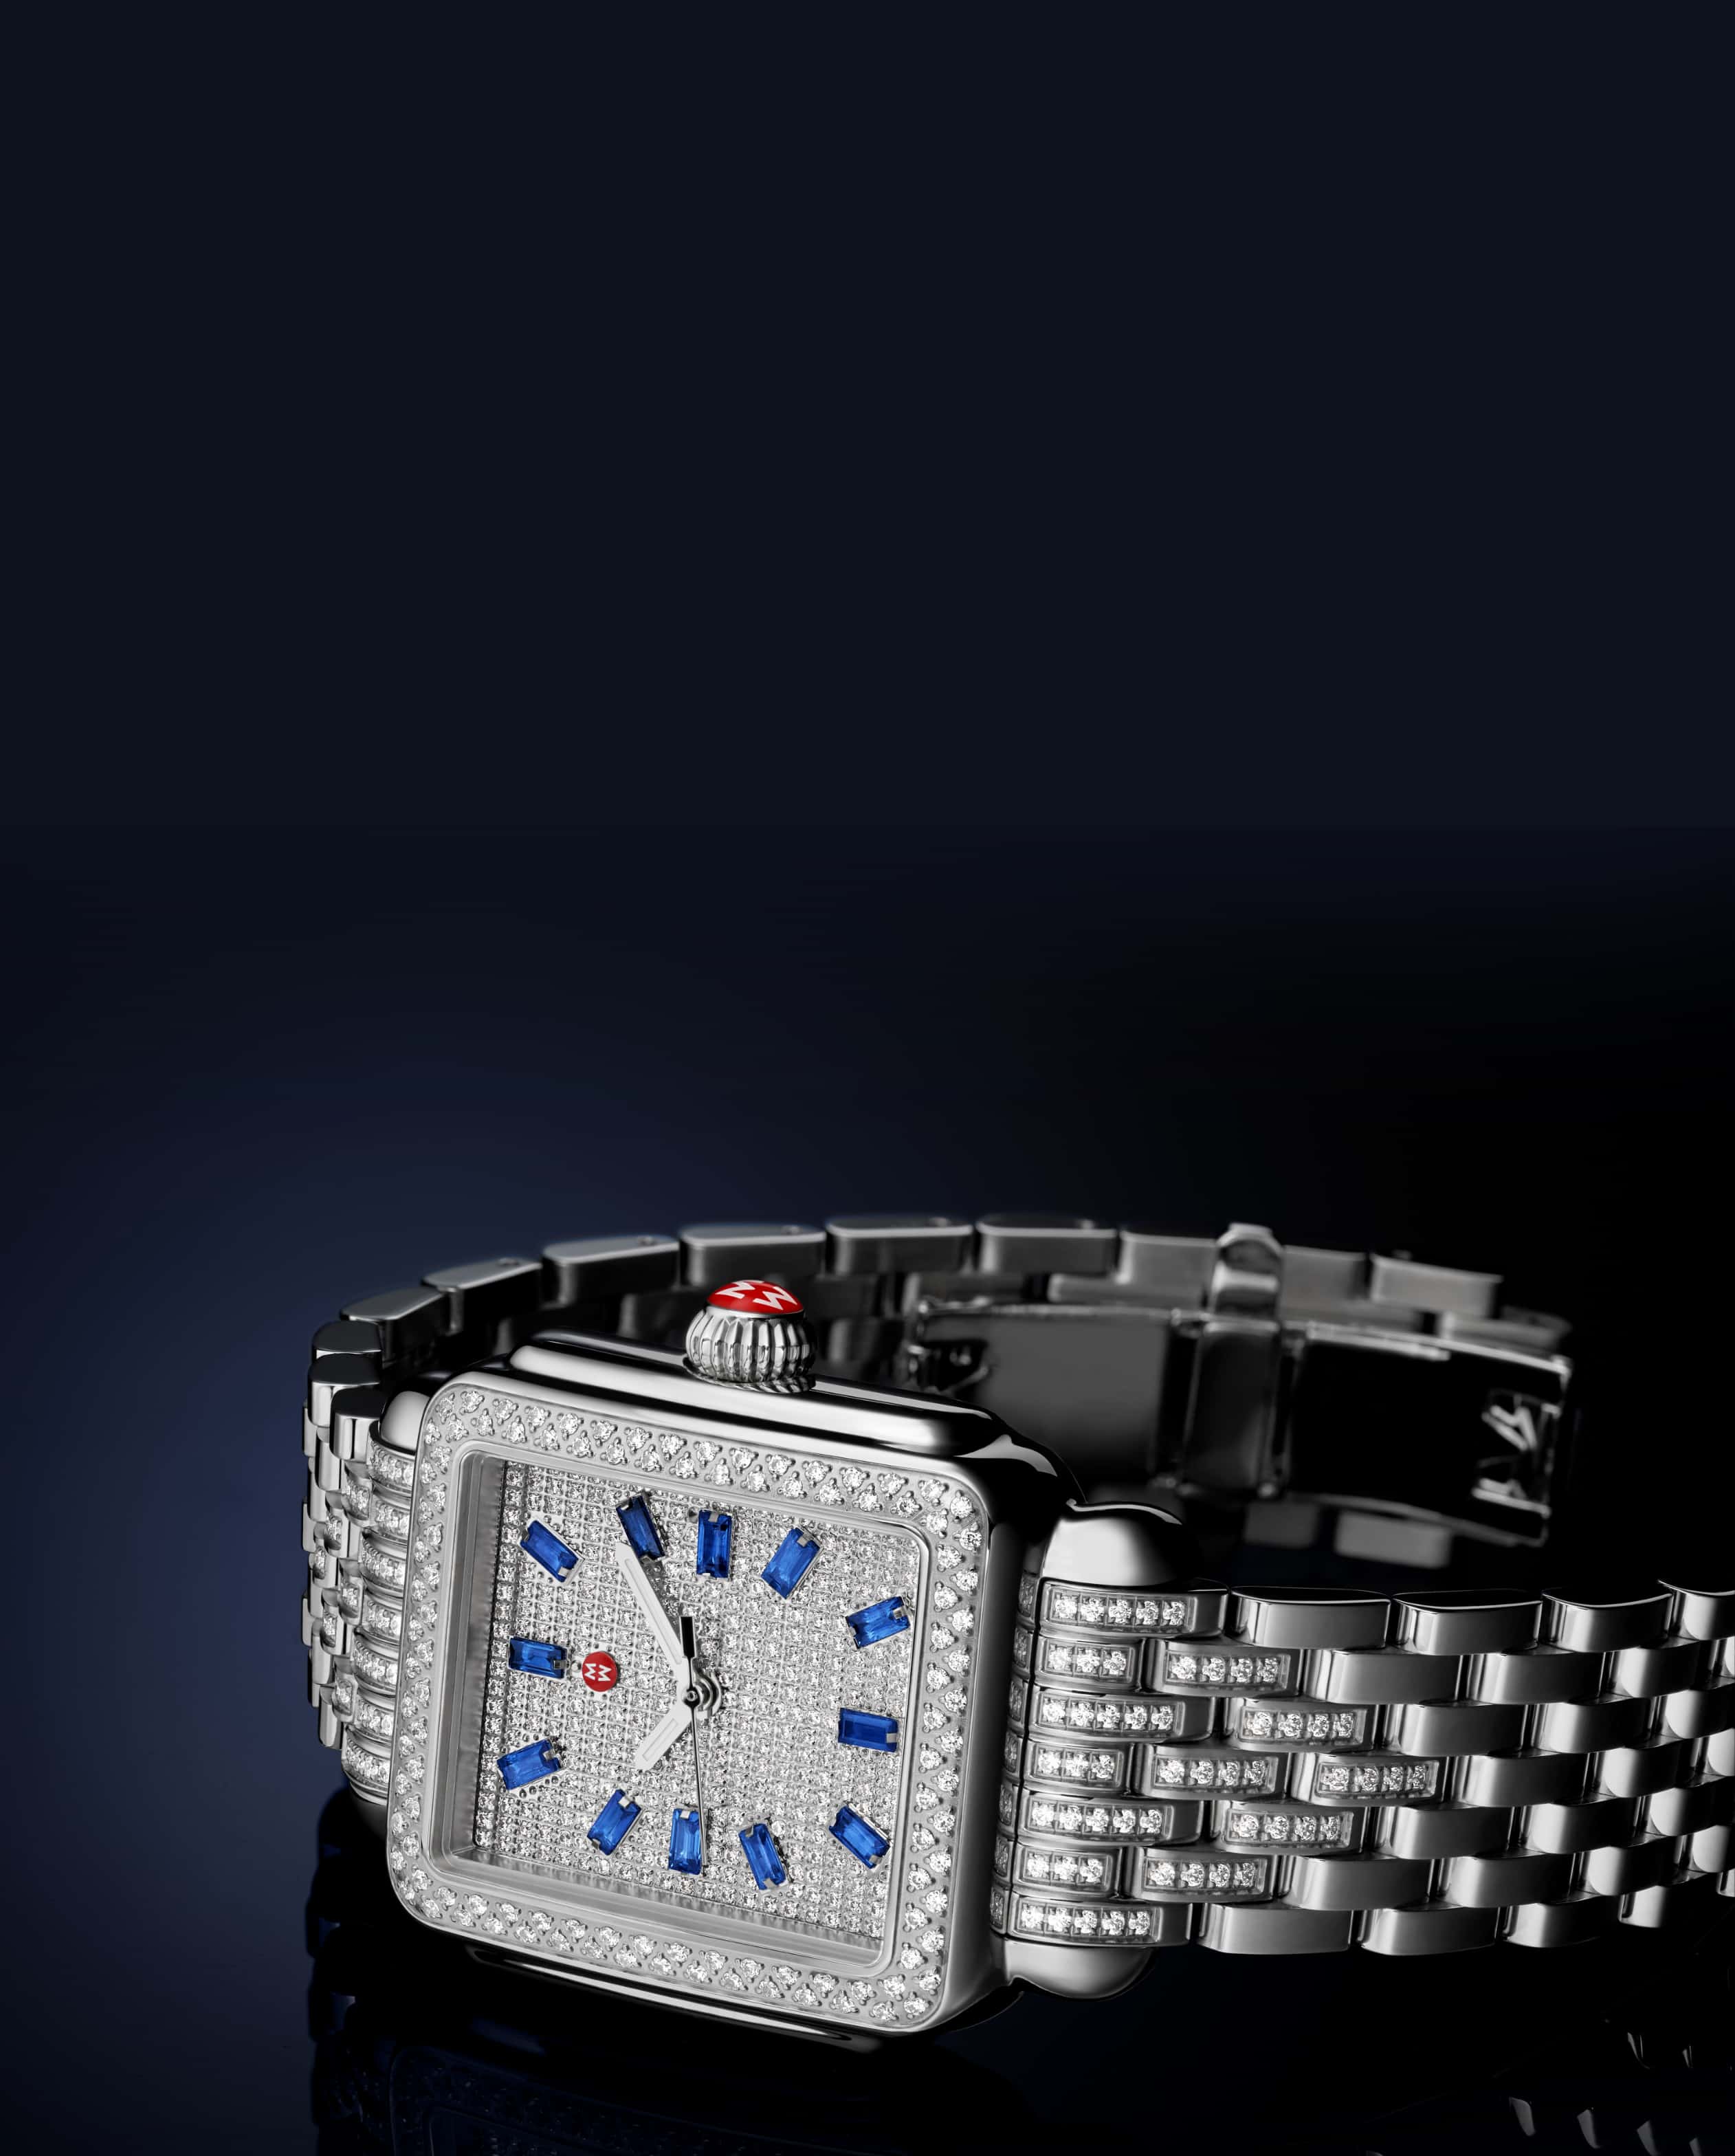 Limited Edition Deco Sapphire watch by MICHELE